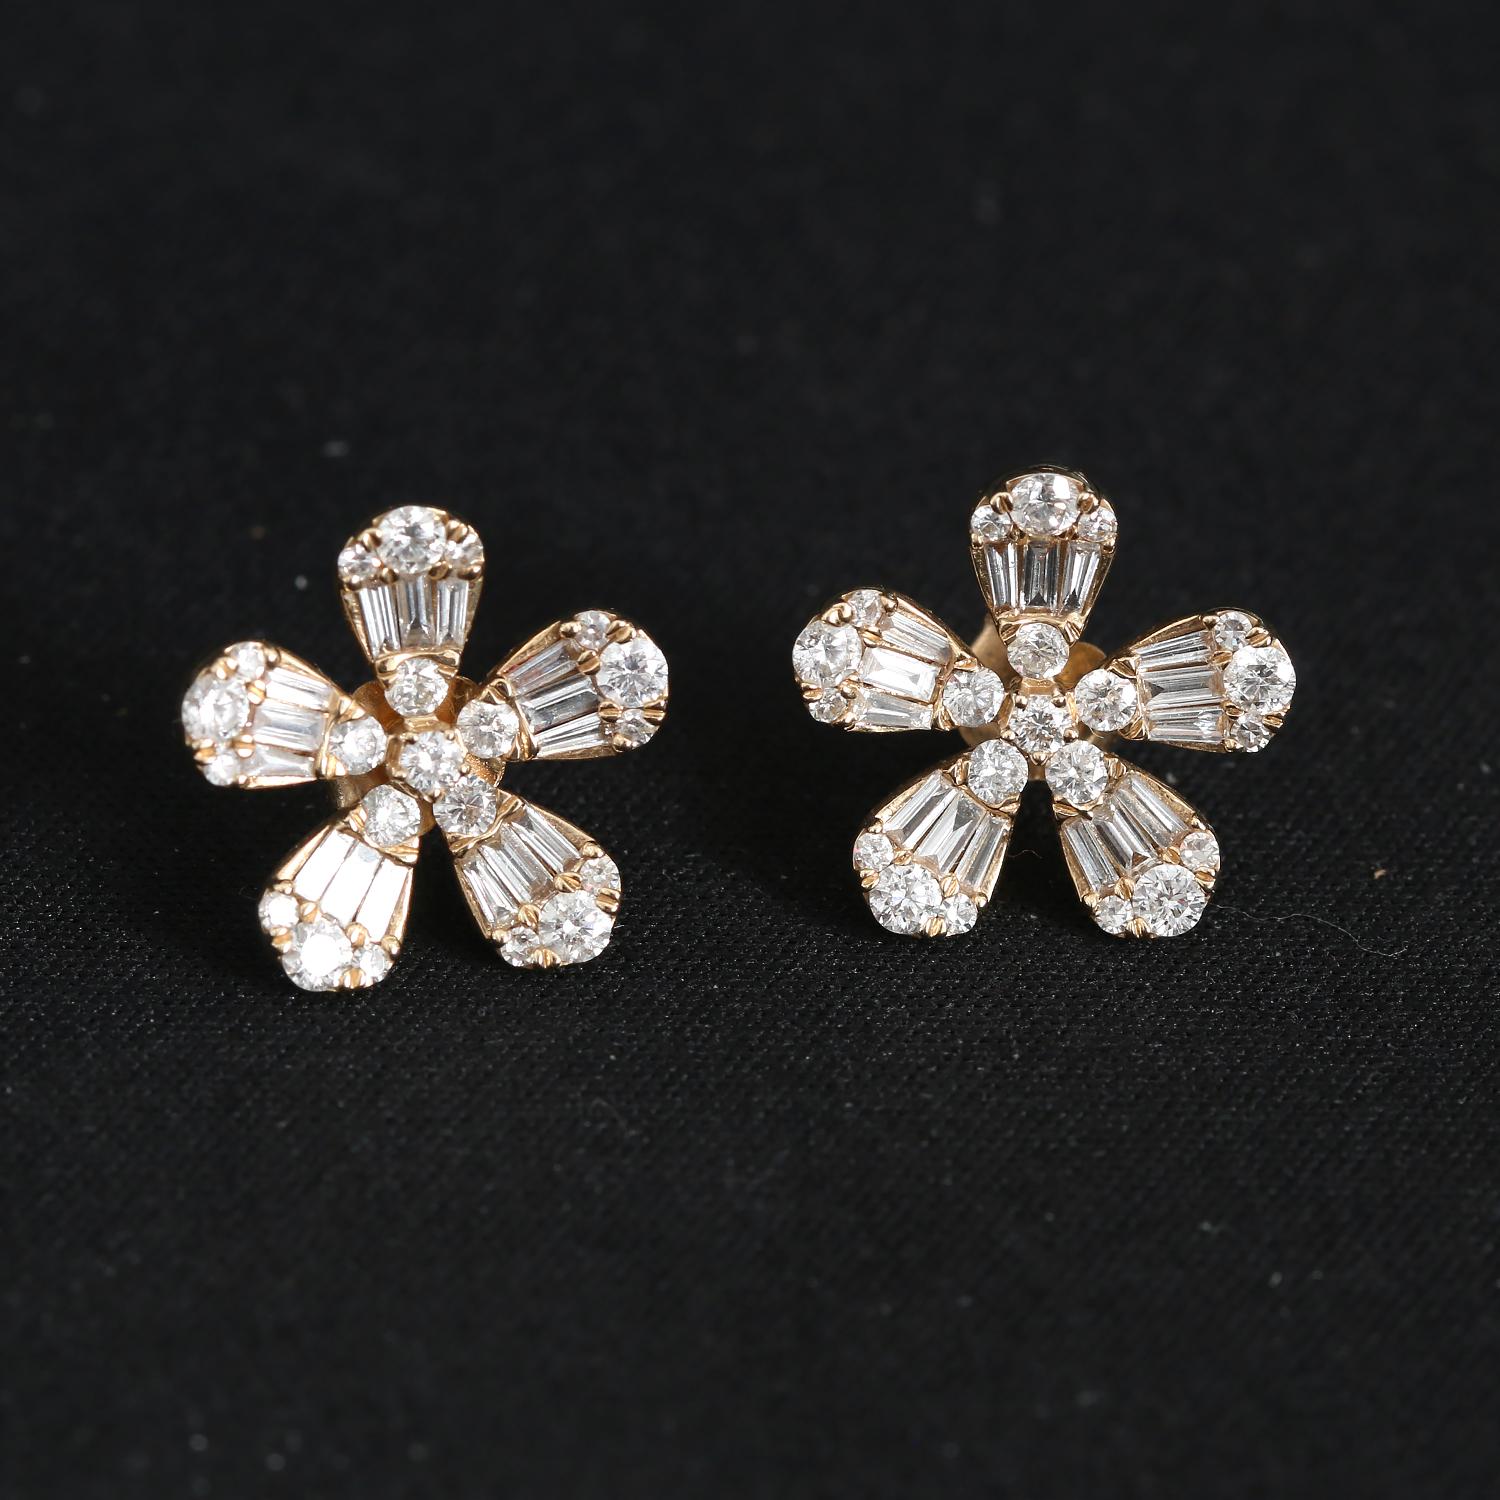 KC Design Diamond Flower Studs 1.51 cts.  - 14K Yellow gold studs with 72 round and baguette diamonds weighing 1.51 cts. Total length is 1/2 inch. SI1-S2-clarity and H-I-color diamonds. Pre-owned with custom box .